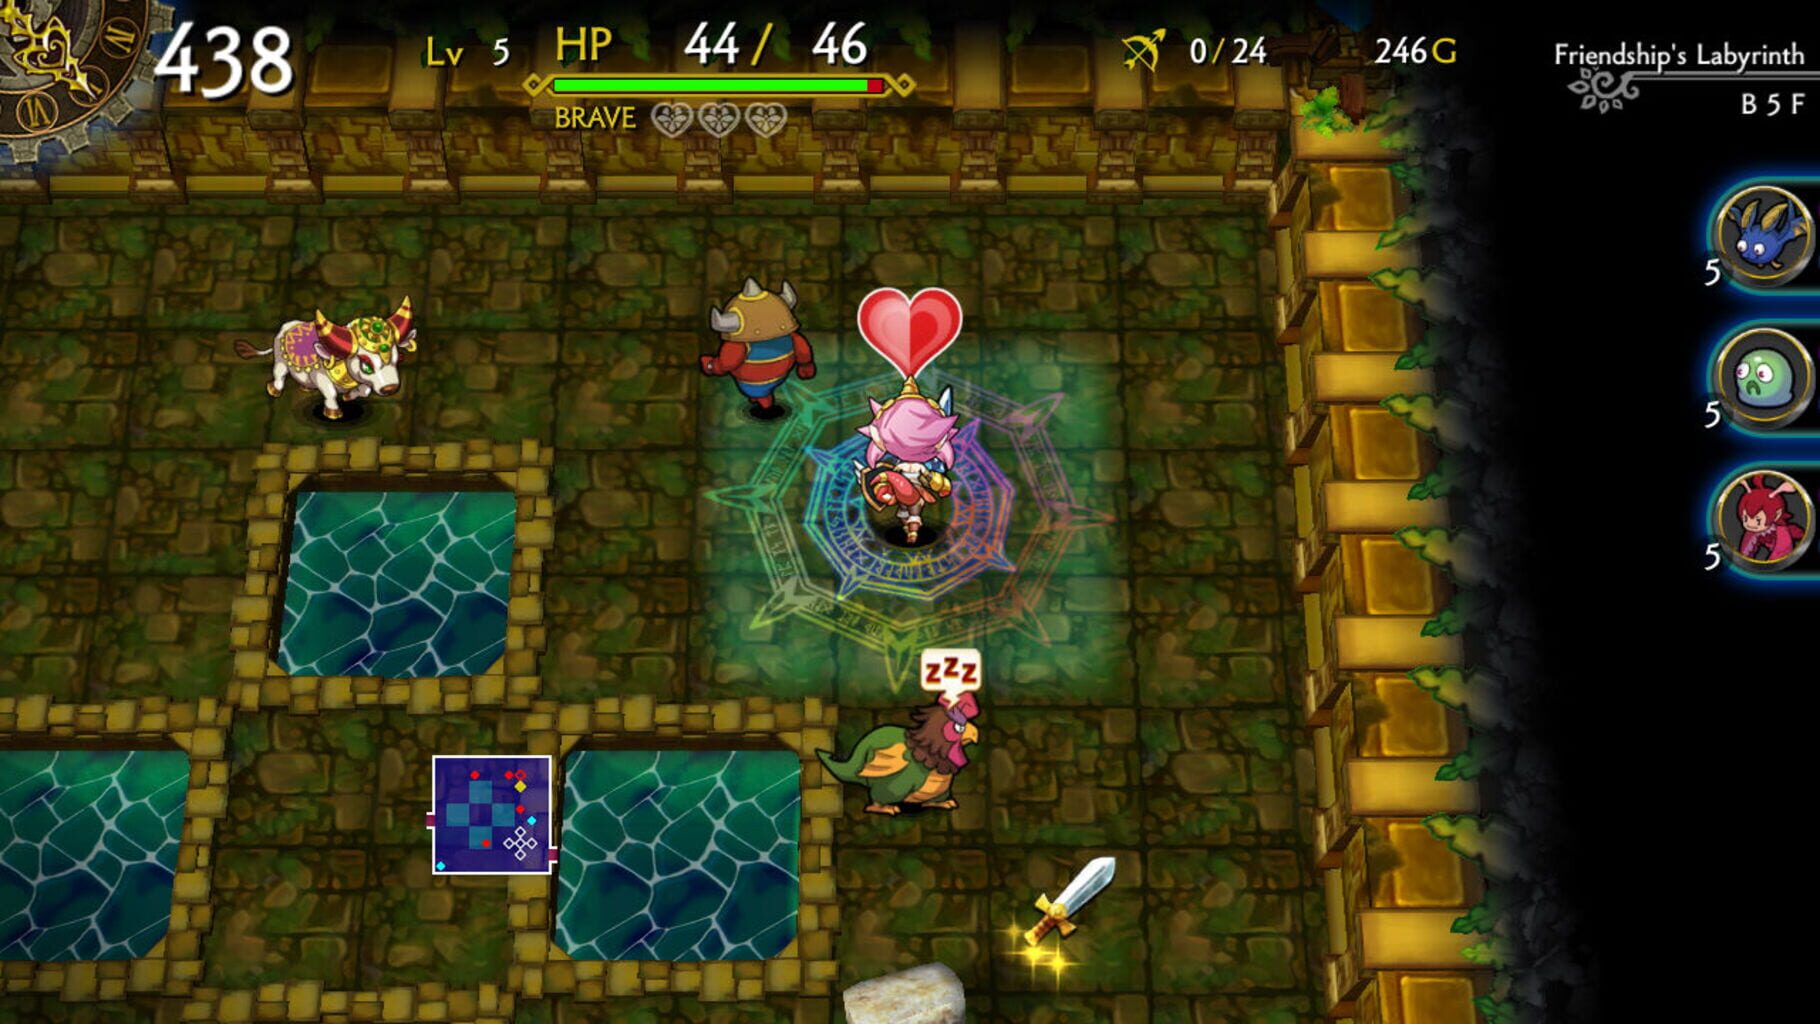 Dragon Fang Z: The Rose & Dungeon of Time - Extra Dungeon: Friendship's Labyrinth screenshot